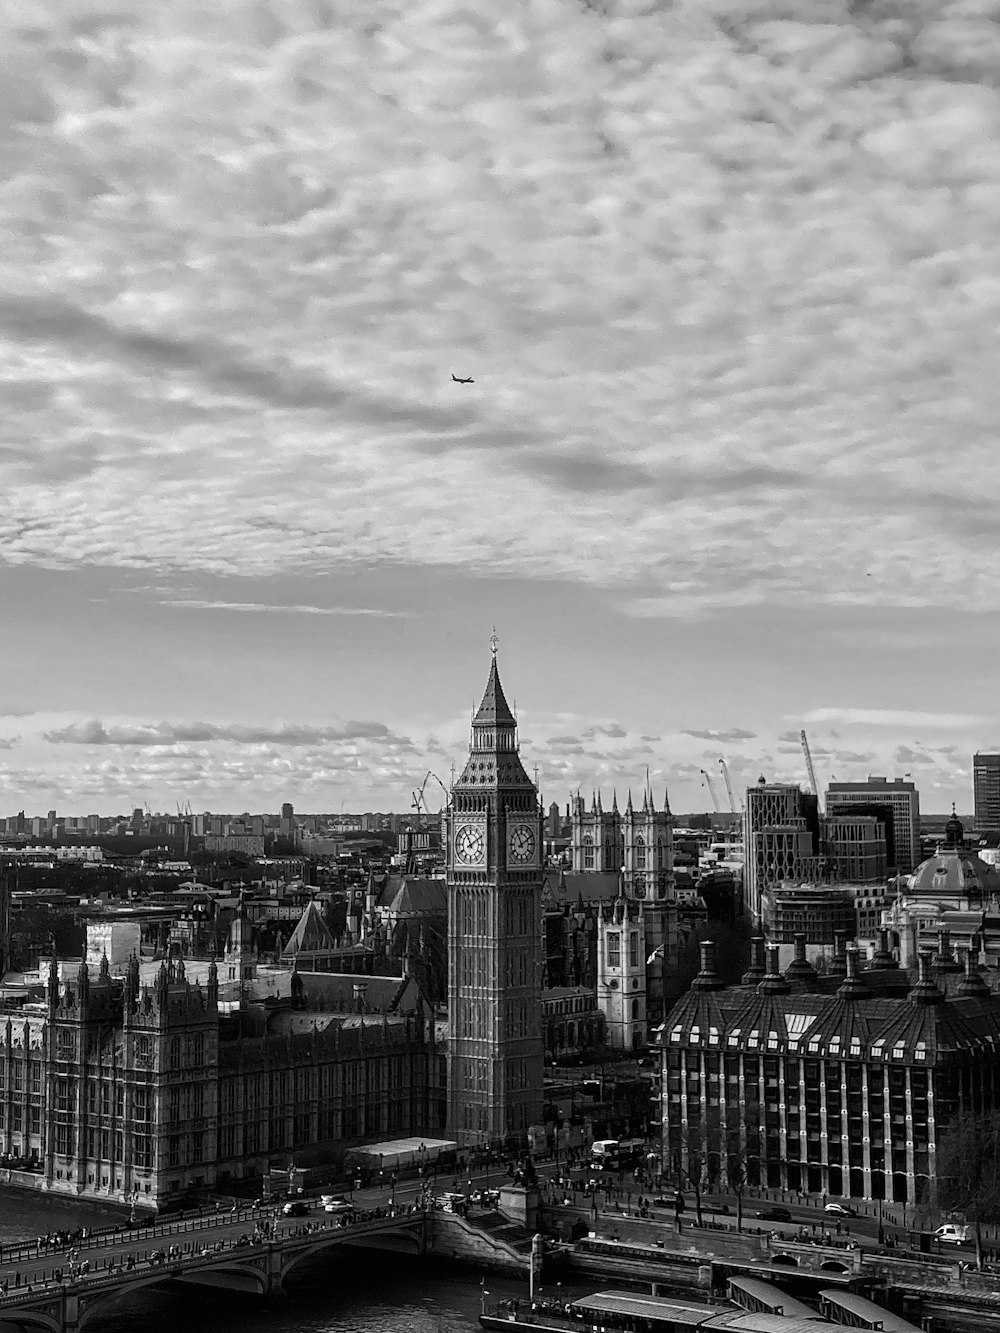 a black and white photo of the big ben clock tower